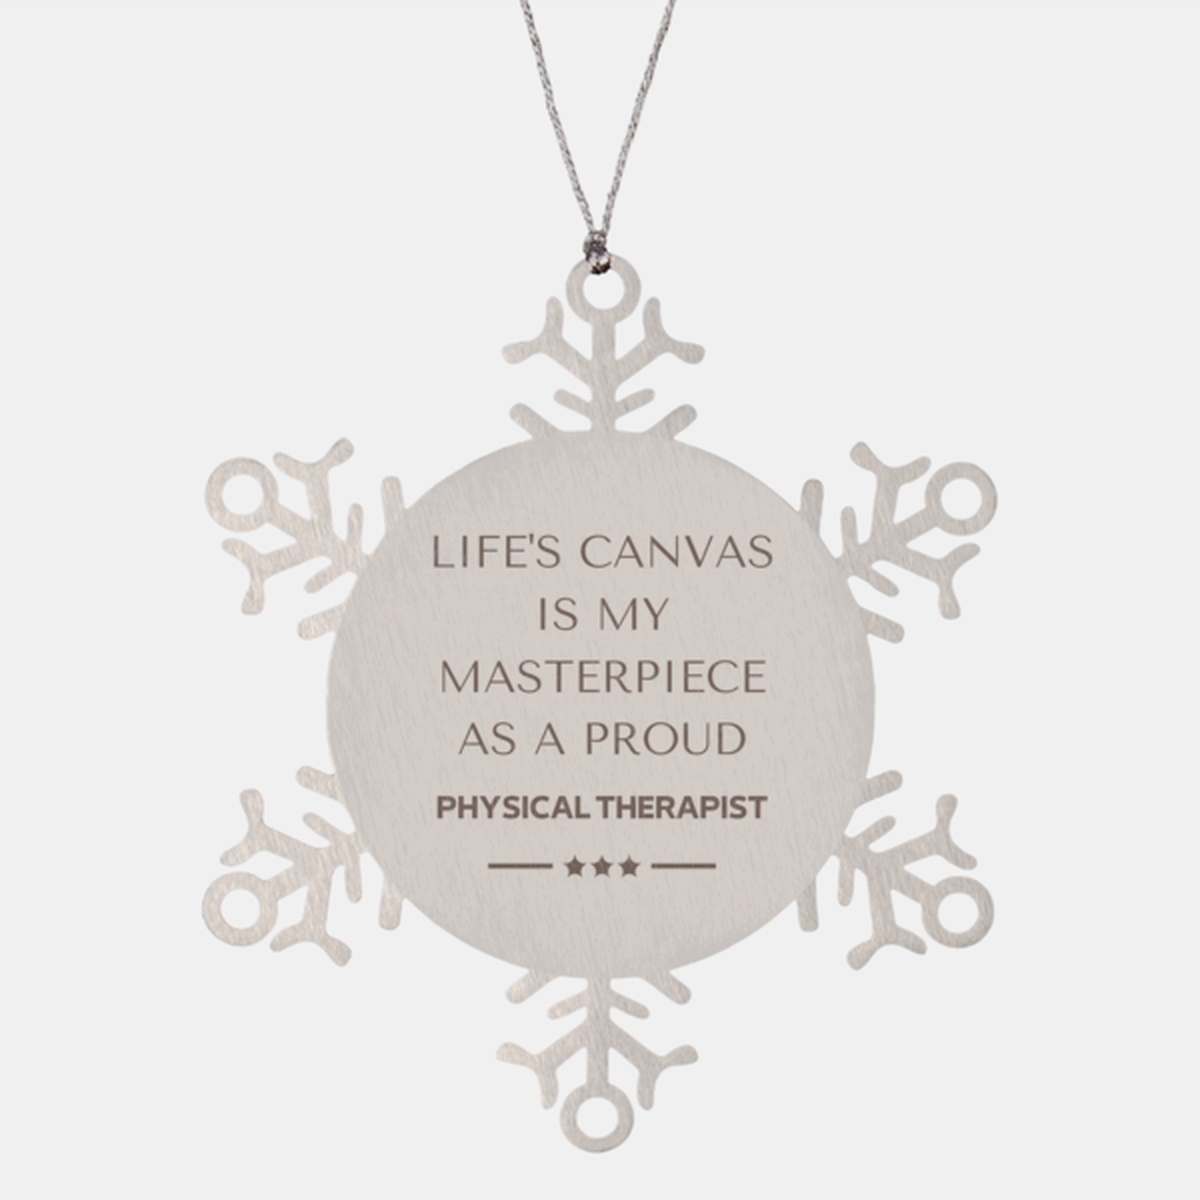 Proud Physical Therapist Gifts, Life's canvas is my masterpiece, Epic Birthday Christmas Unique Snowflake Ornament For Physical Therapist, Coworkers, Men, Women, Friends